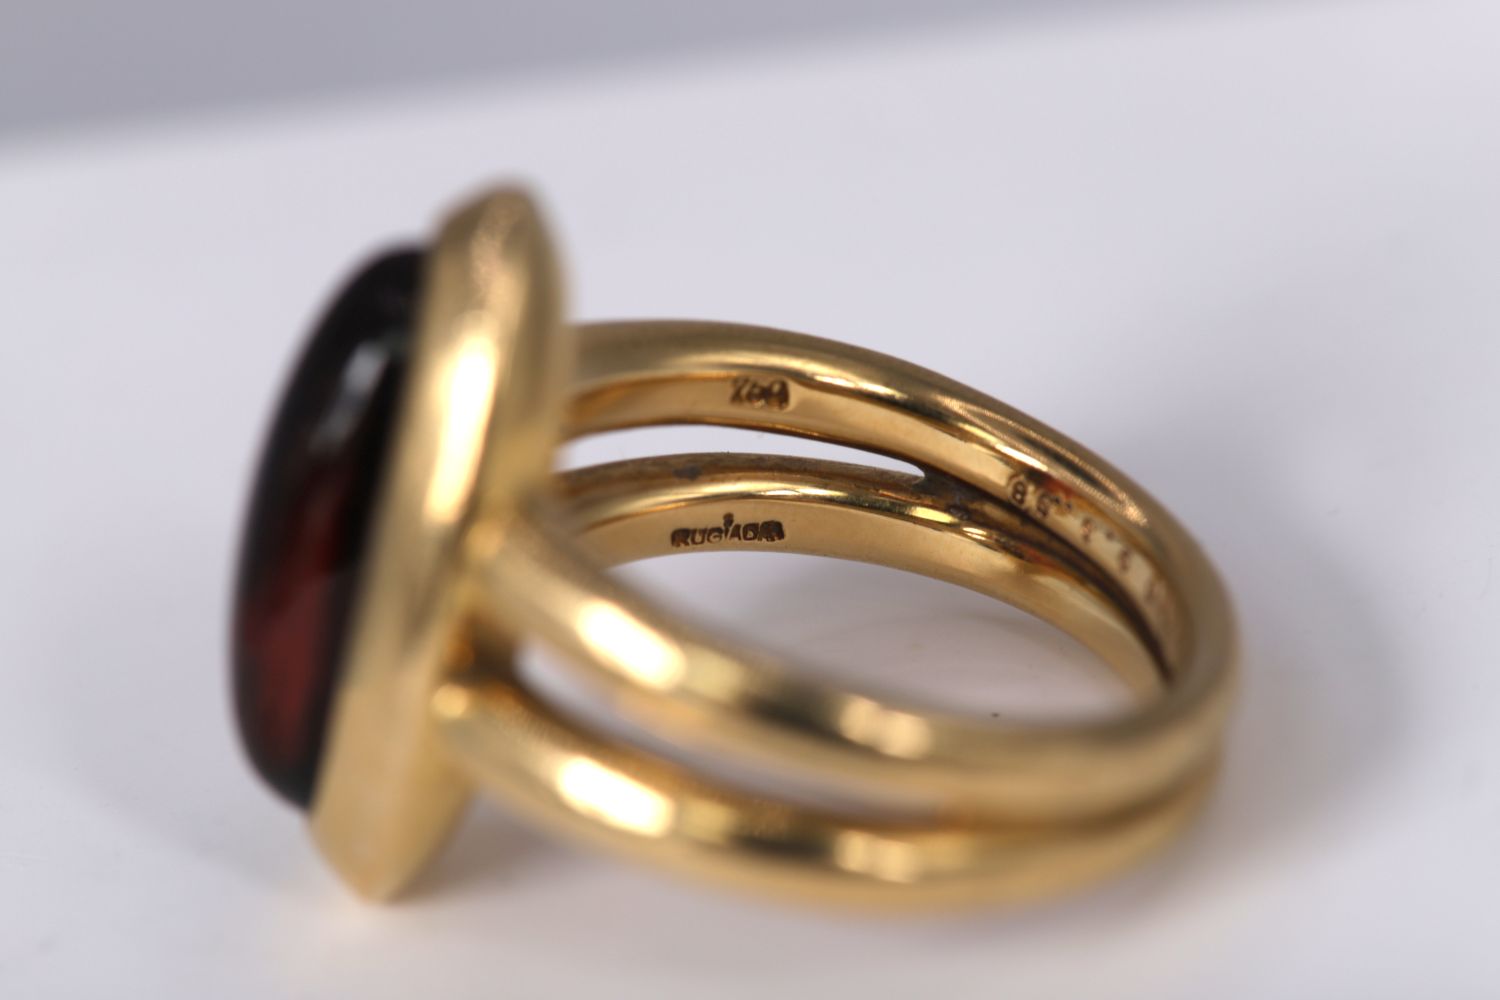 18K YELLOW GOLD MODERNIST RING - Image 4 of 4